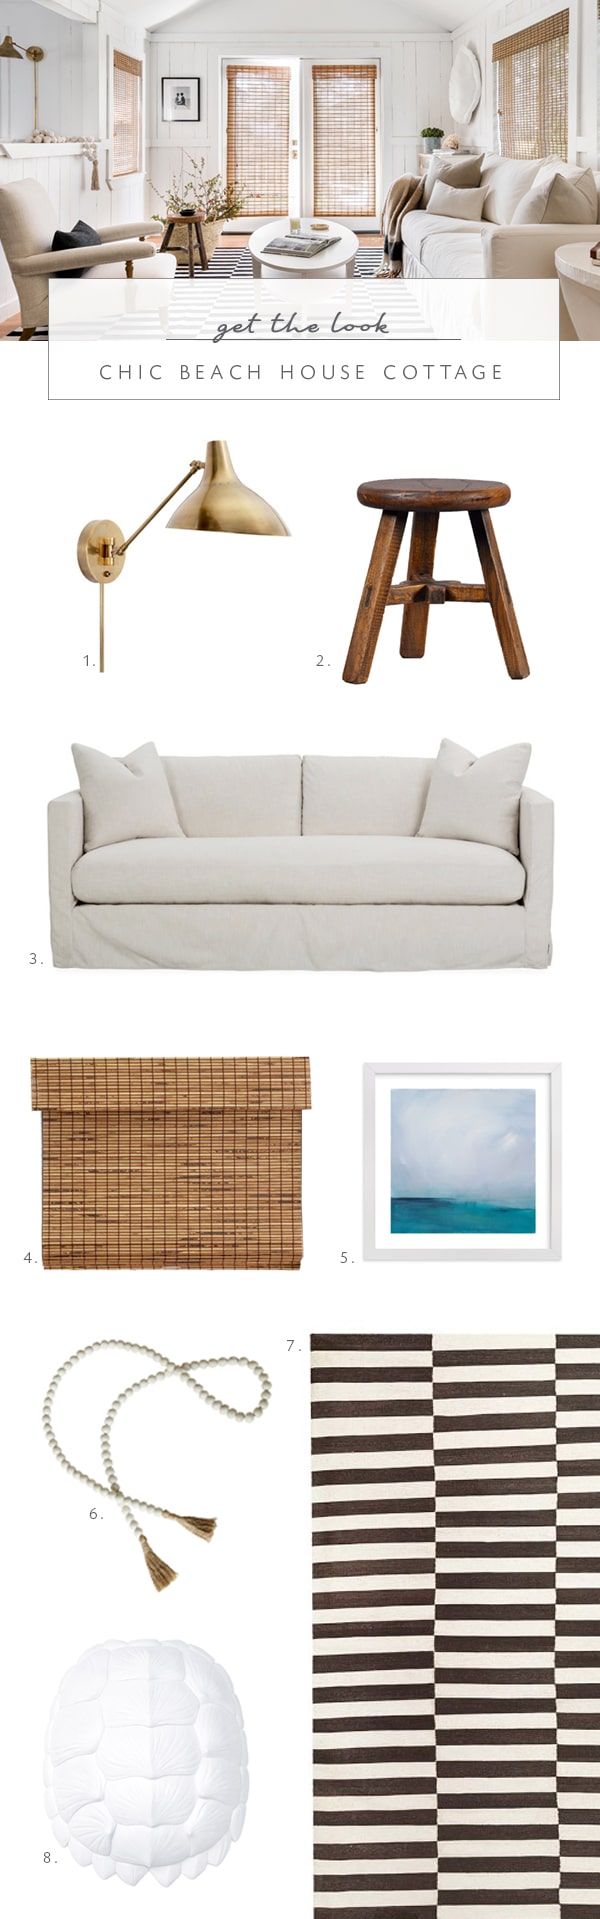 chic-beach-cottage-get-the-look